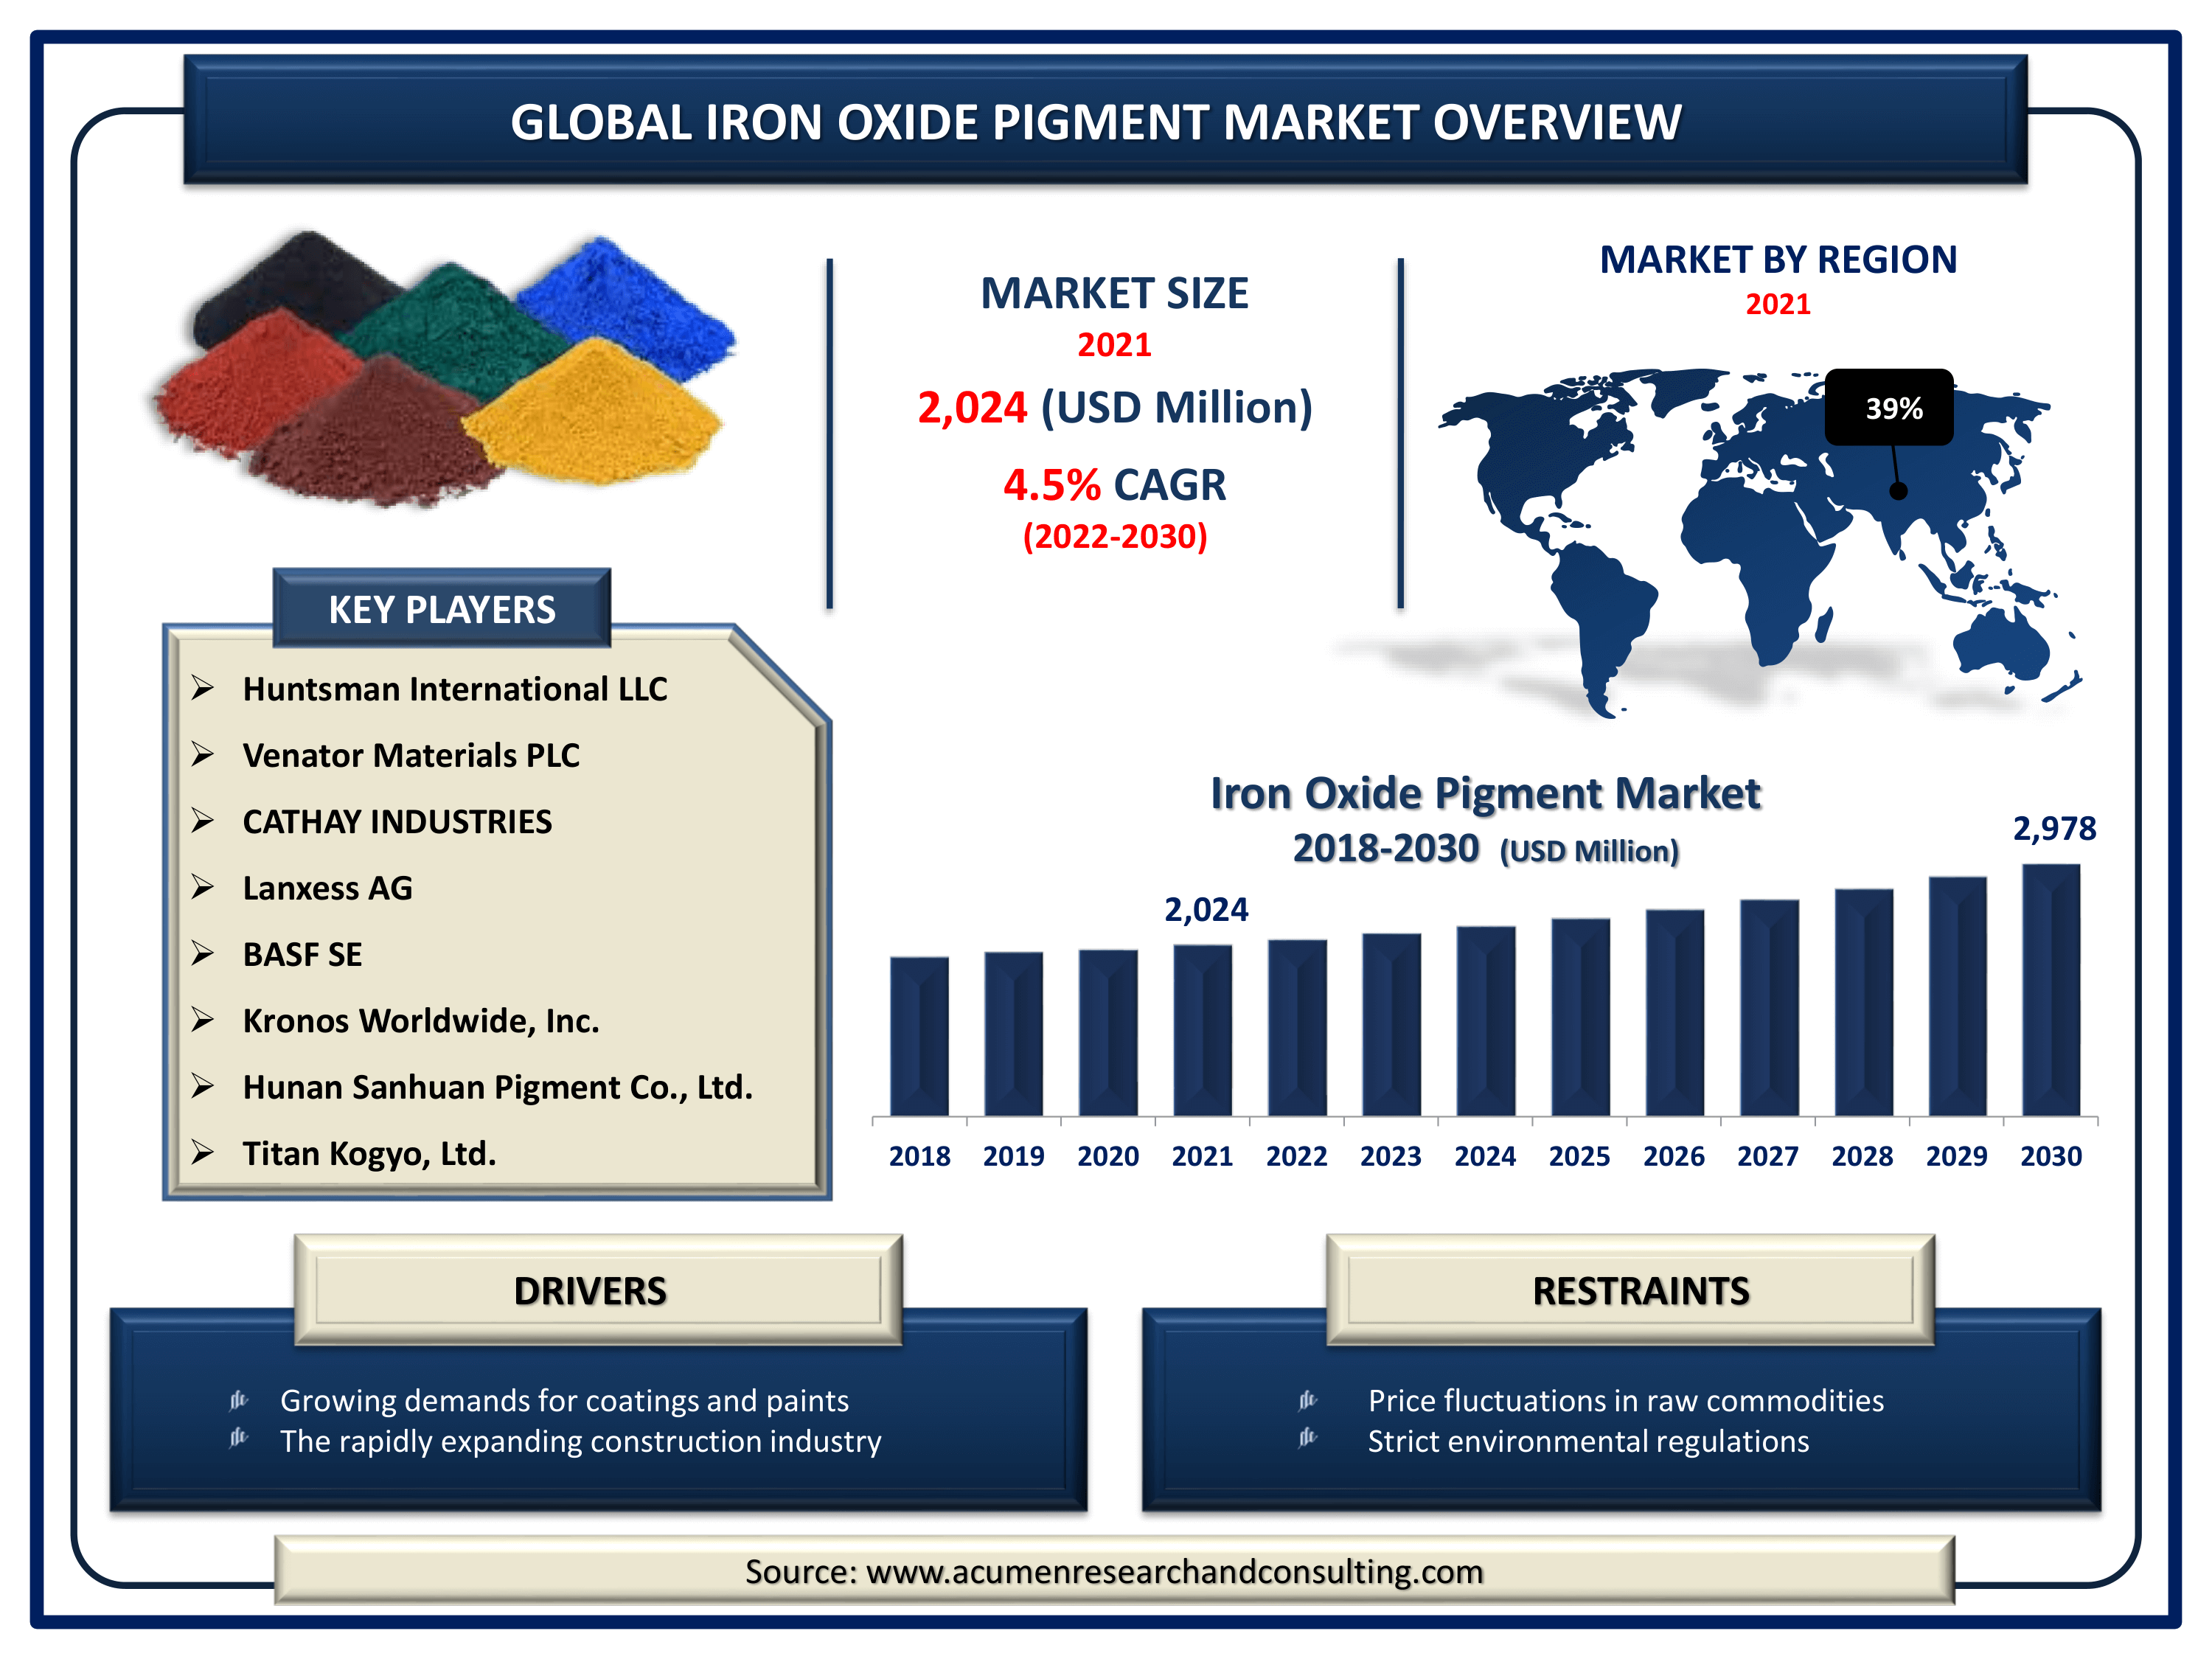 Global iron oxide pigment market revenue is expected to increase by USD 2,978 million by 2030, with a 4.5% CAGR from 2022 to 2030.